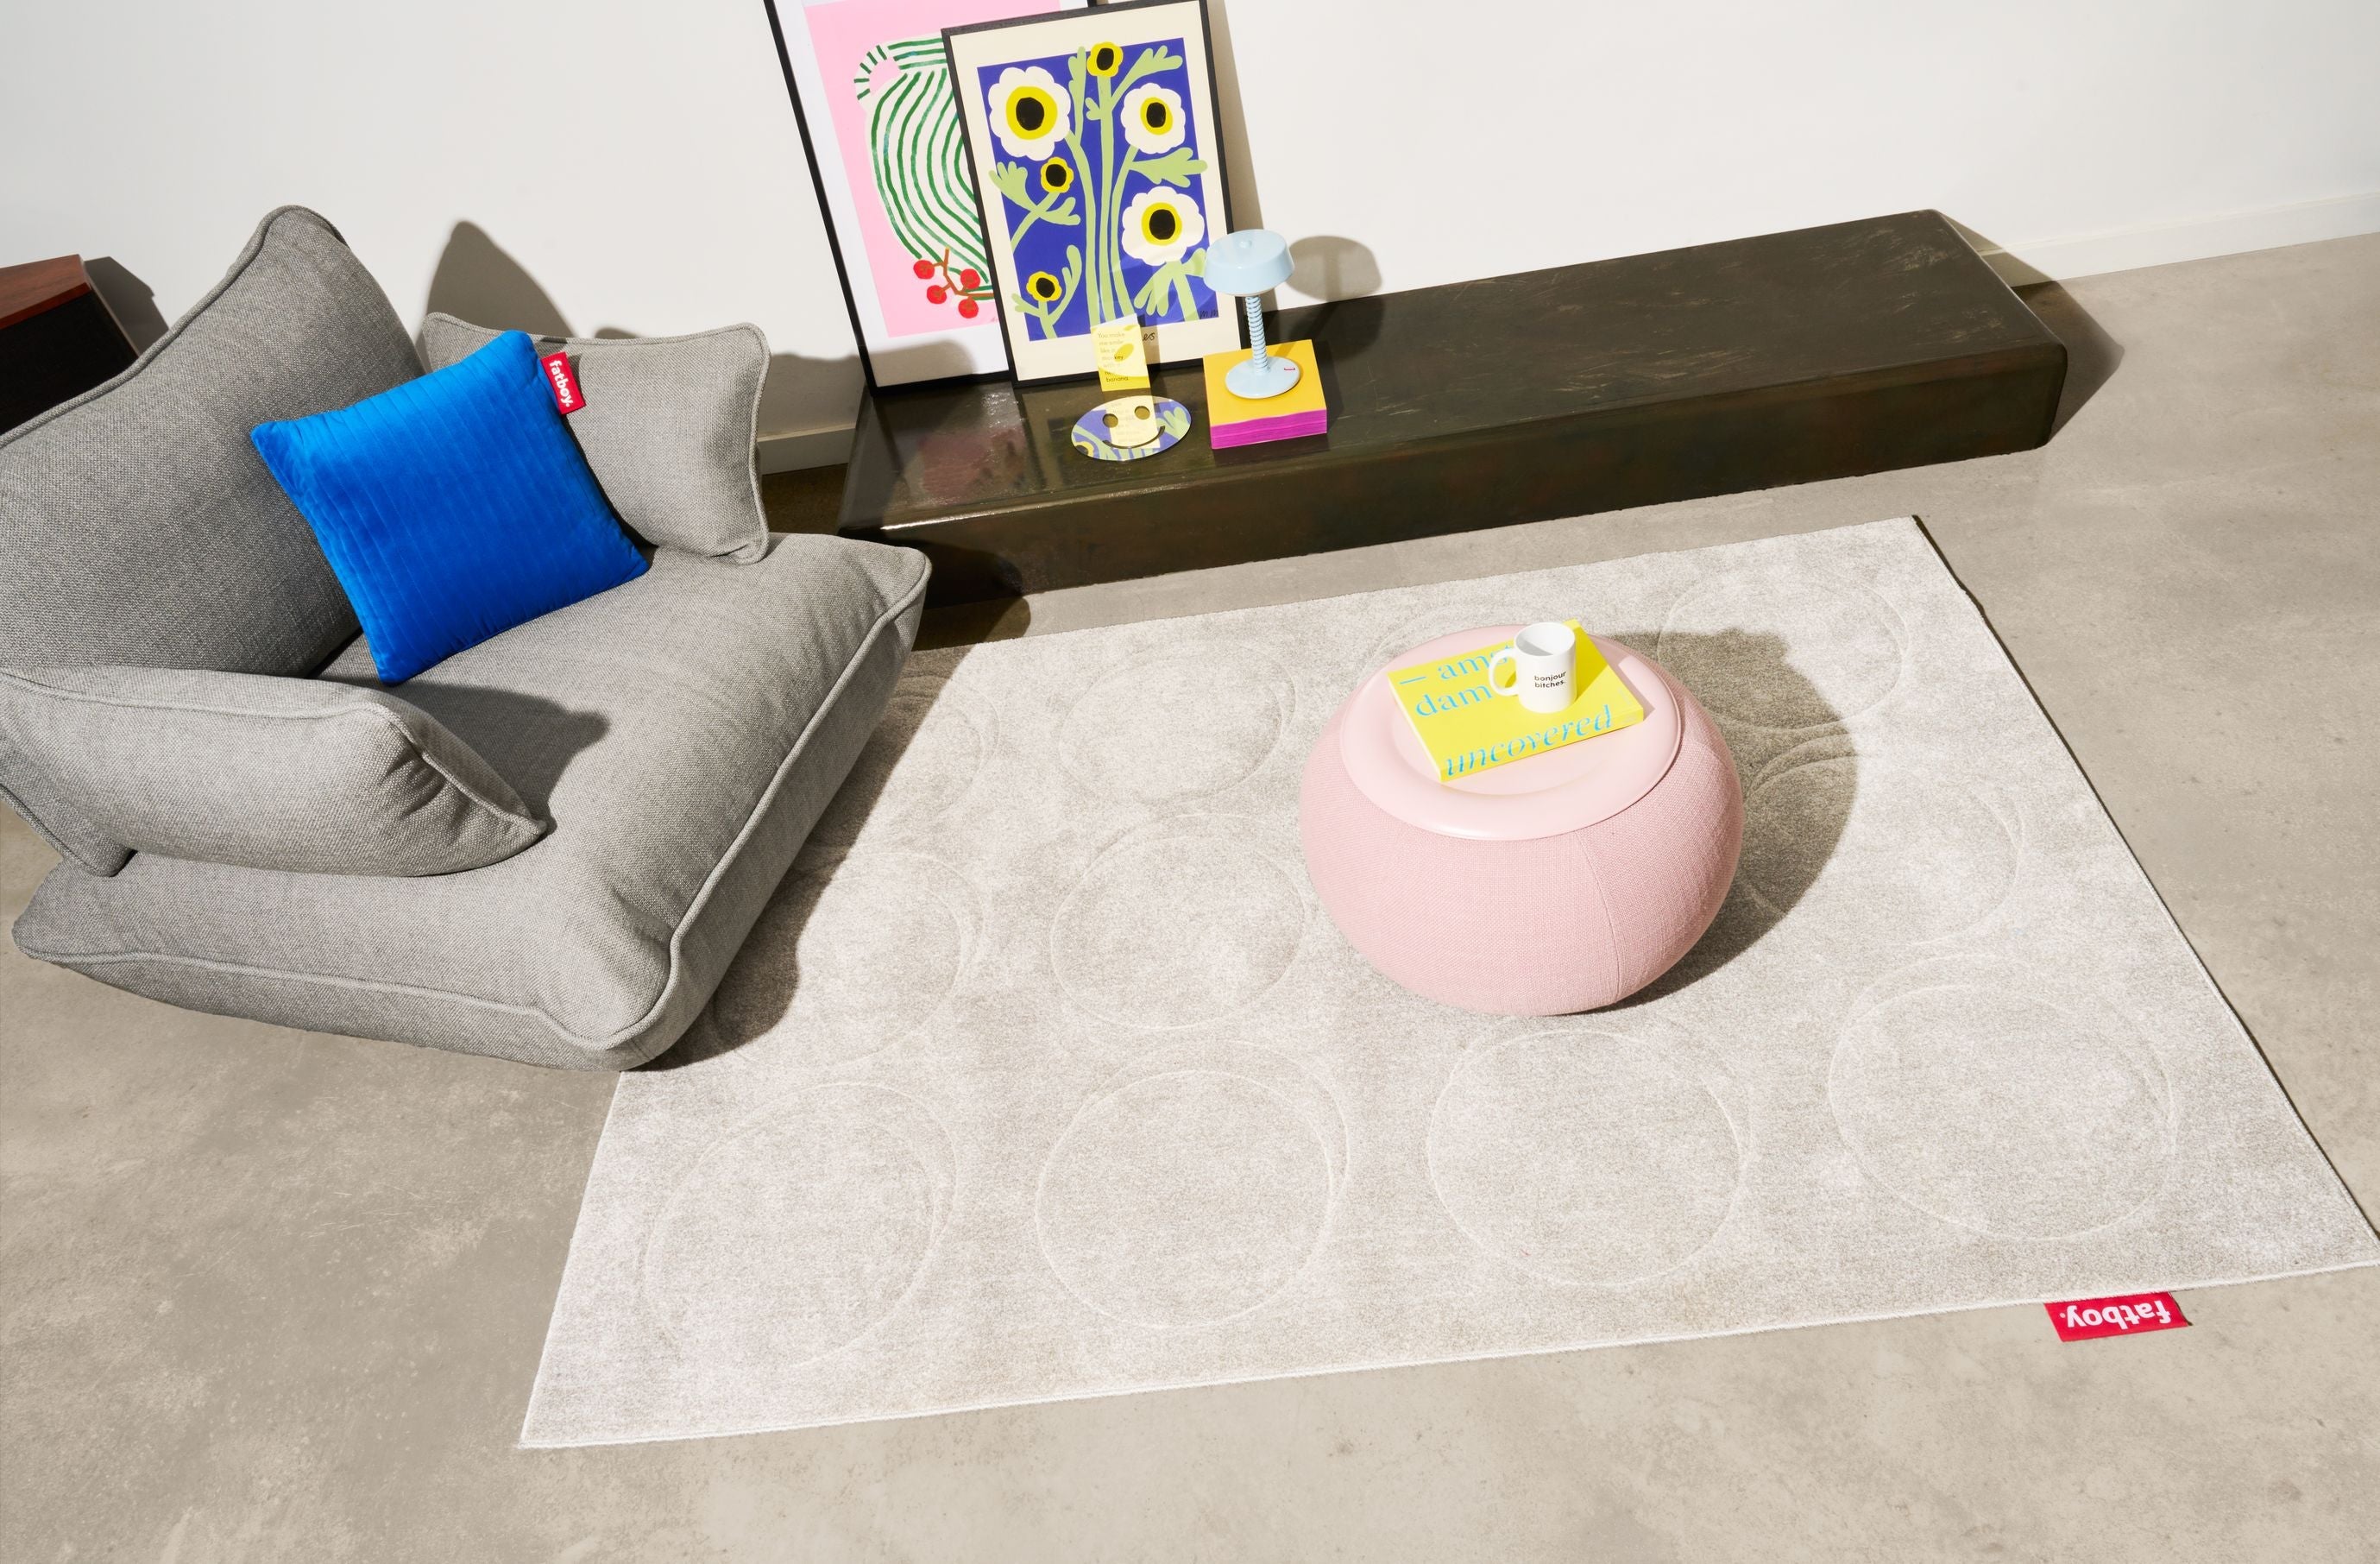 Fatboy Dumpty Coffee Table, Bubble Pink